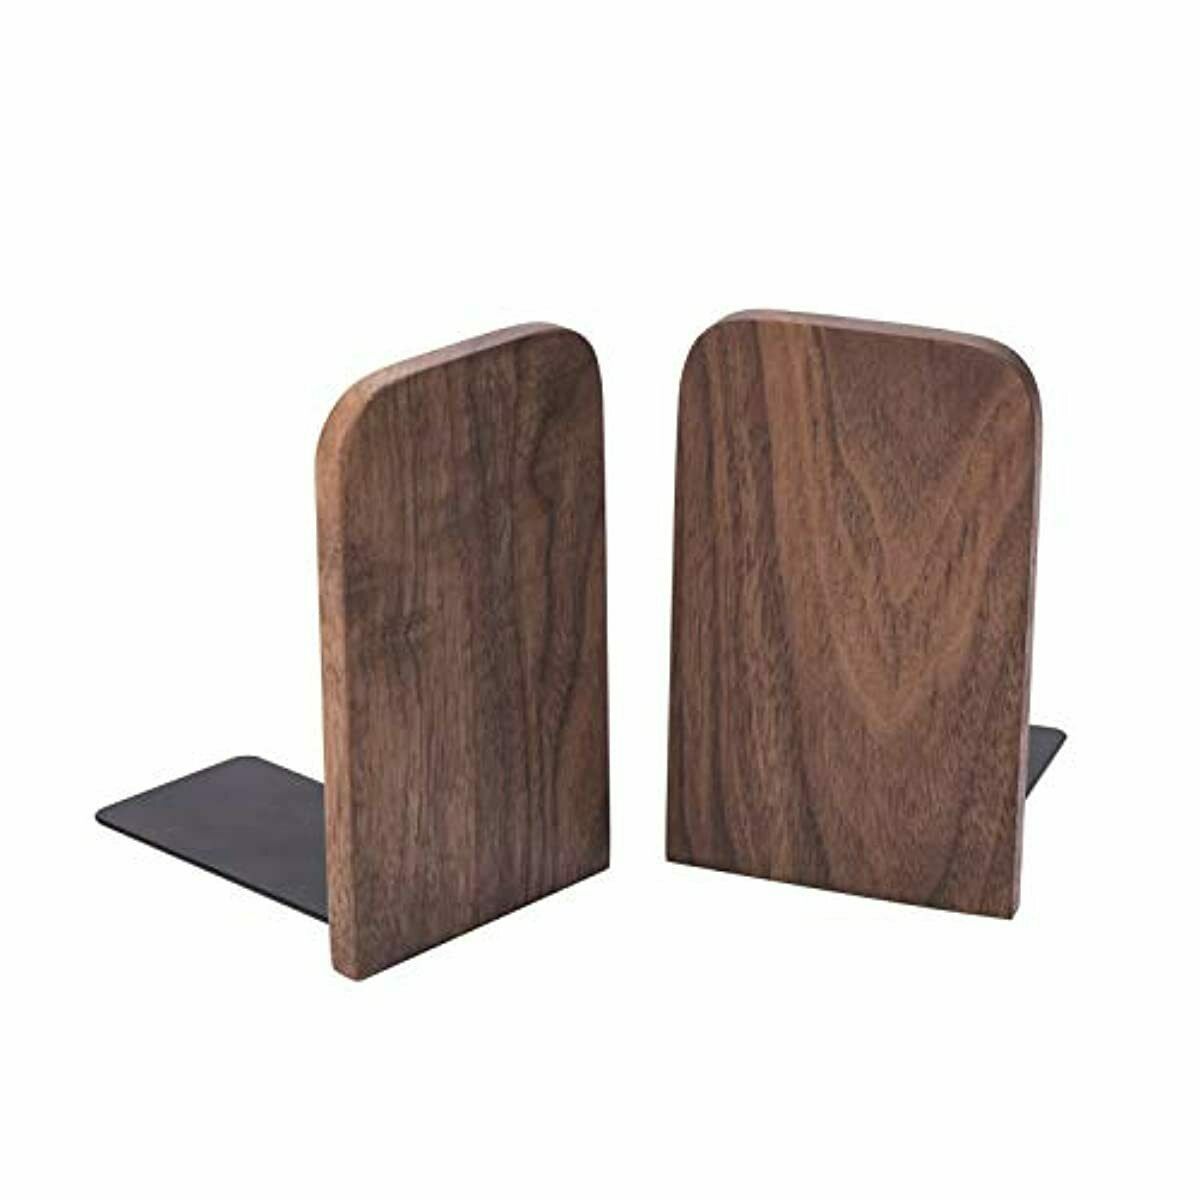 Vintage Wooden Bookends with Metal Base 2 Pcs Heavy Duty Black Walnut Book Stand